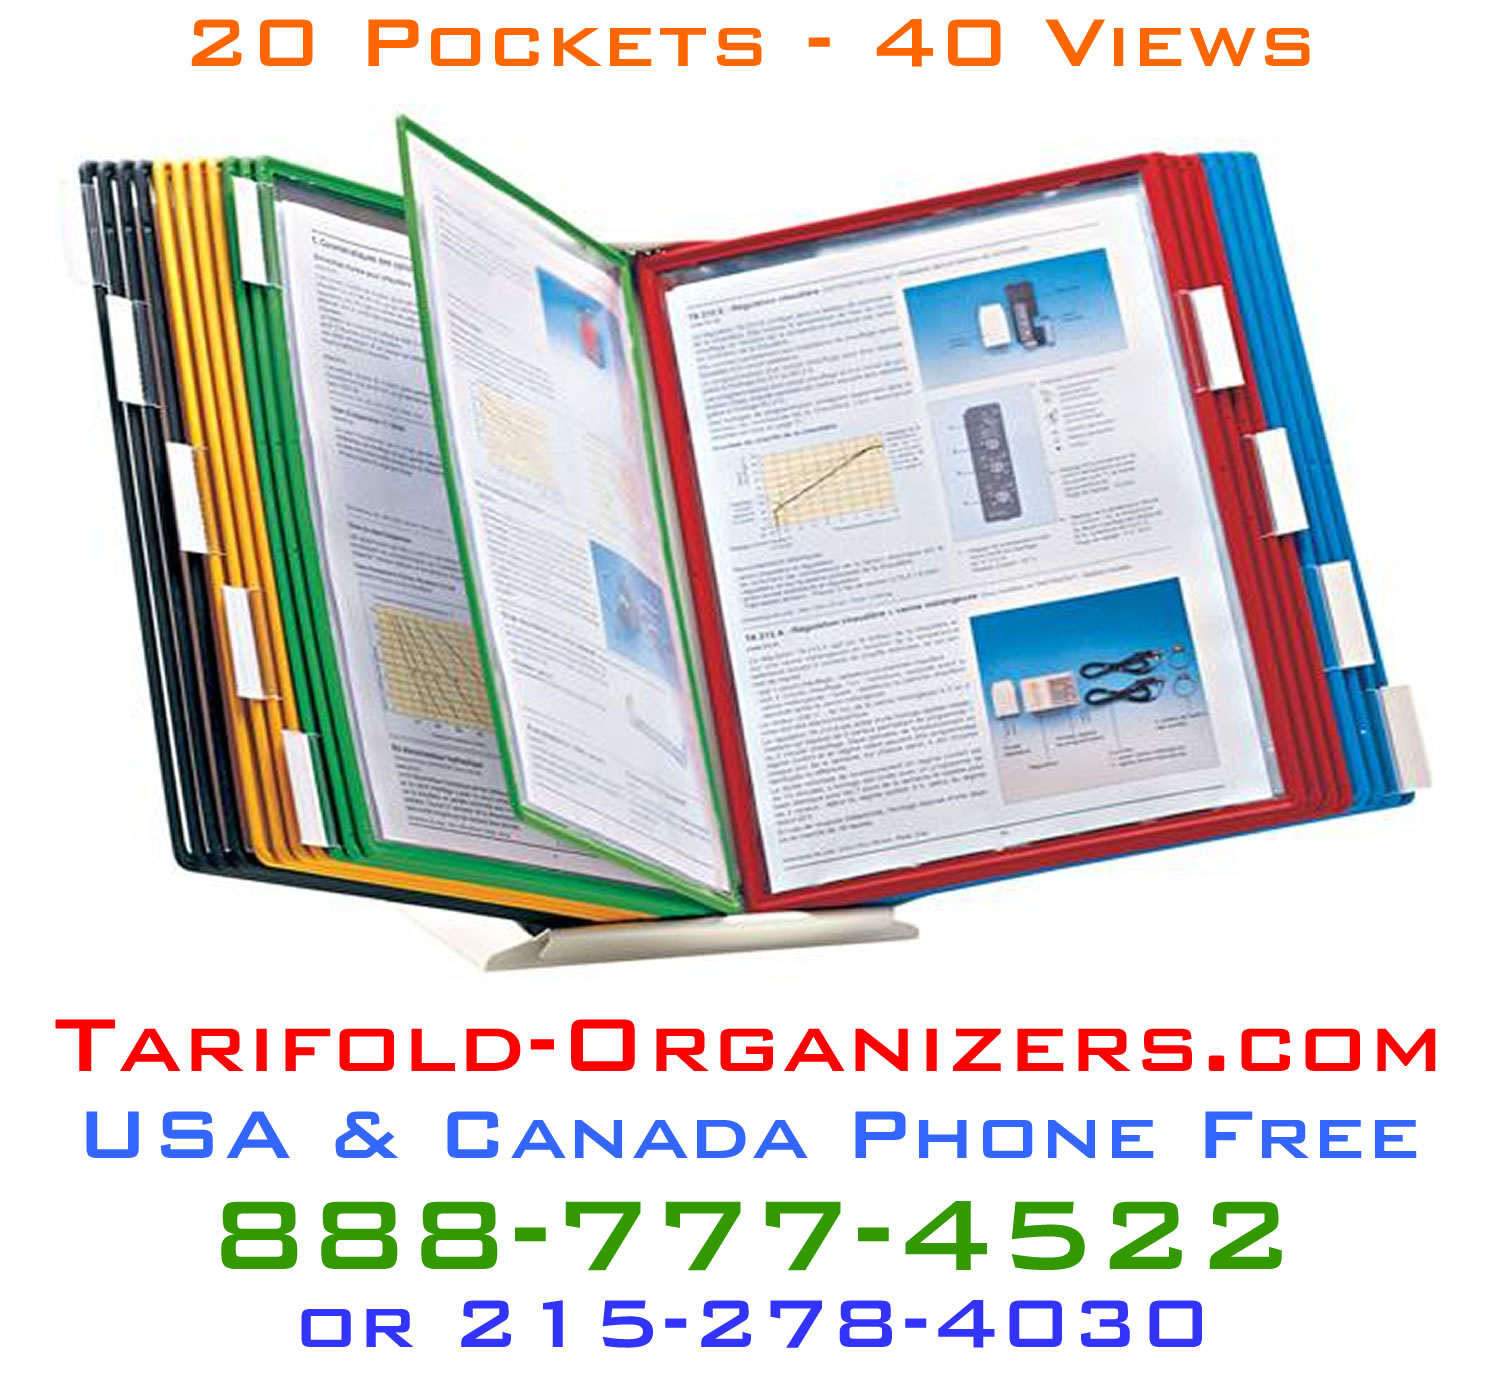 Tarifold desktop organizer for organizing visual graphs, charts and productivity assessments.